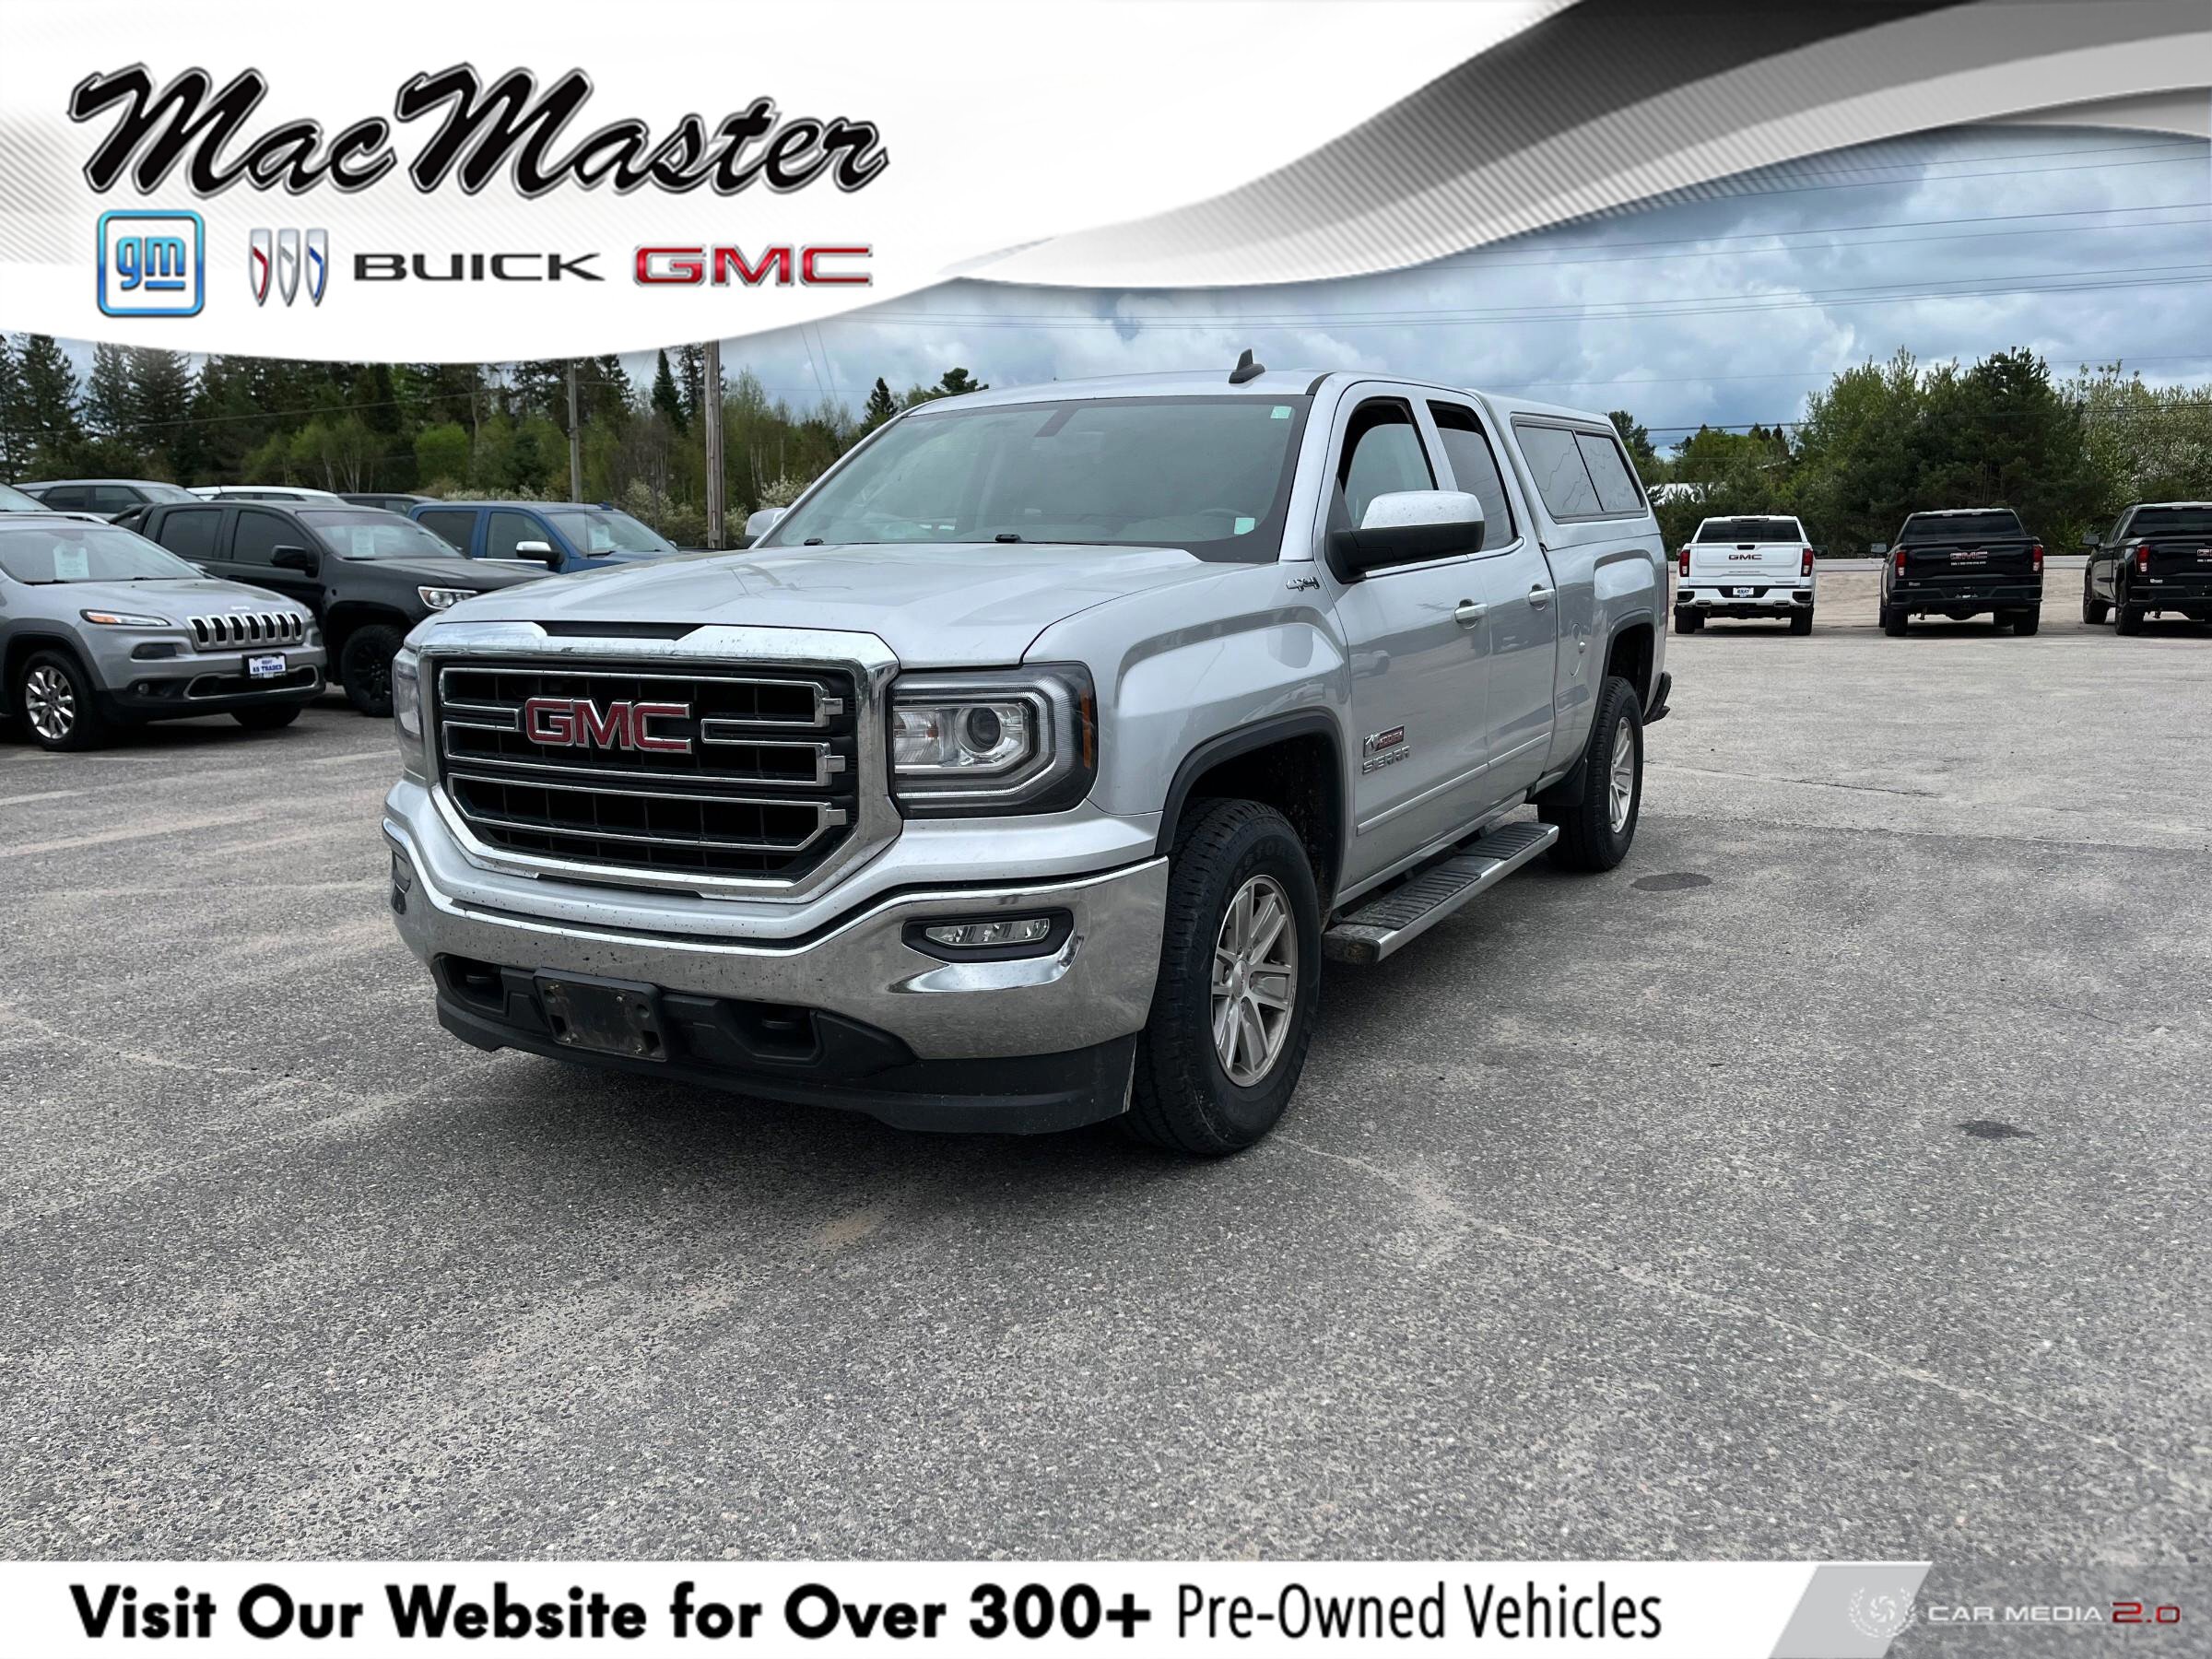 2017 GMC Sierra 1500 SLE CERTIFIED PREOWNED | CLEAN CARFAX | 1-OWNER